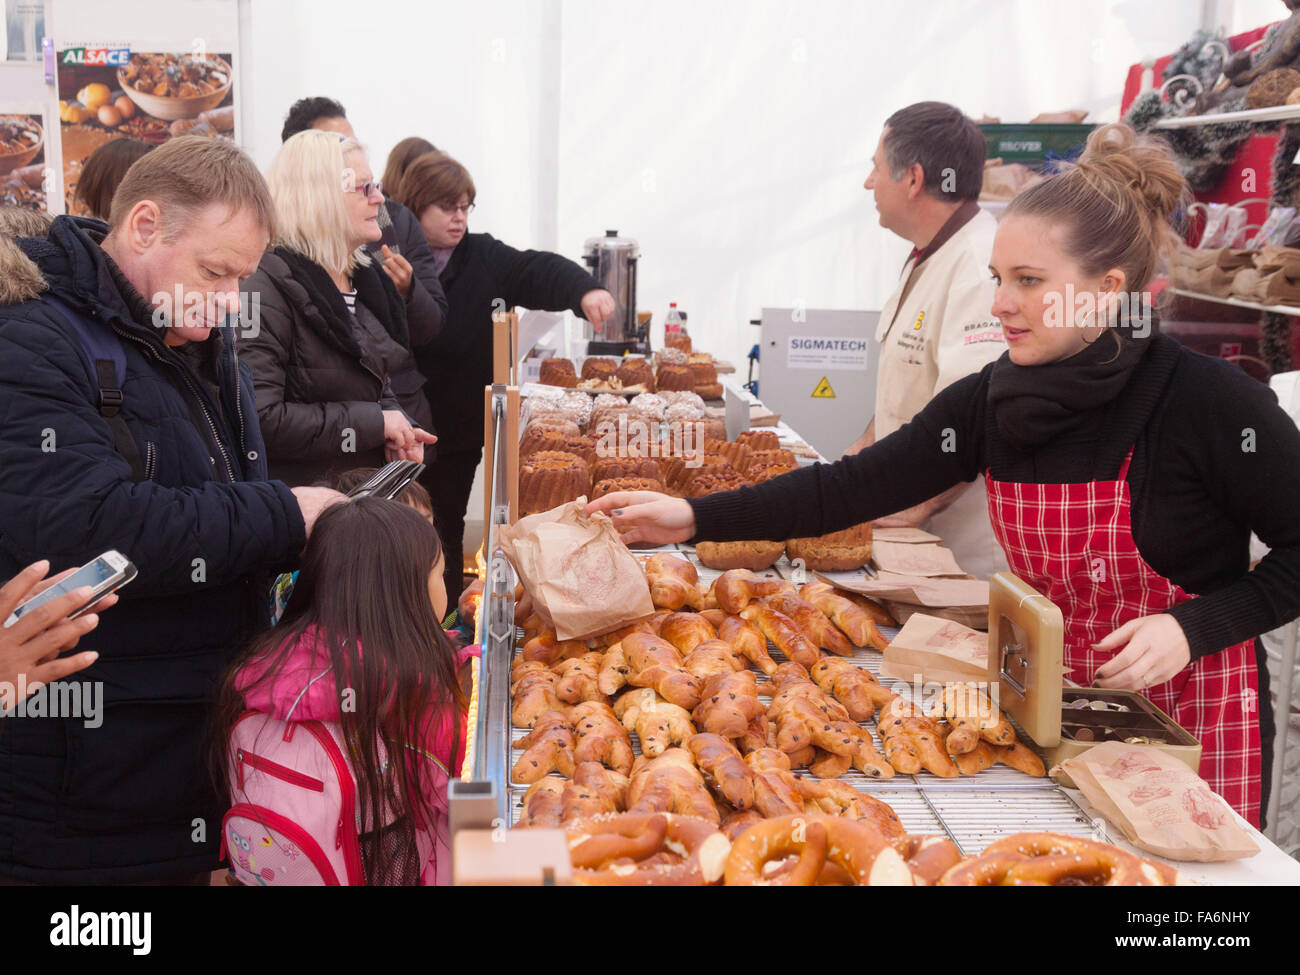 People buying bread in a French bakery, Strasbourg, Alsace, France Europe Stock Photo